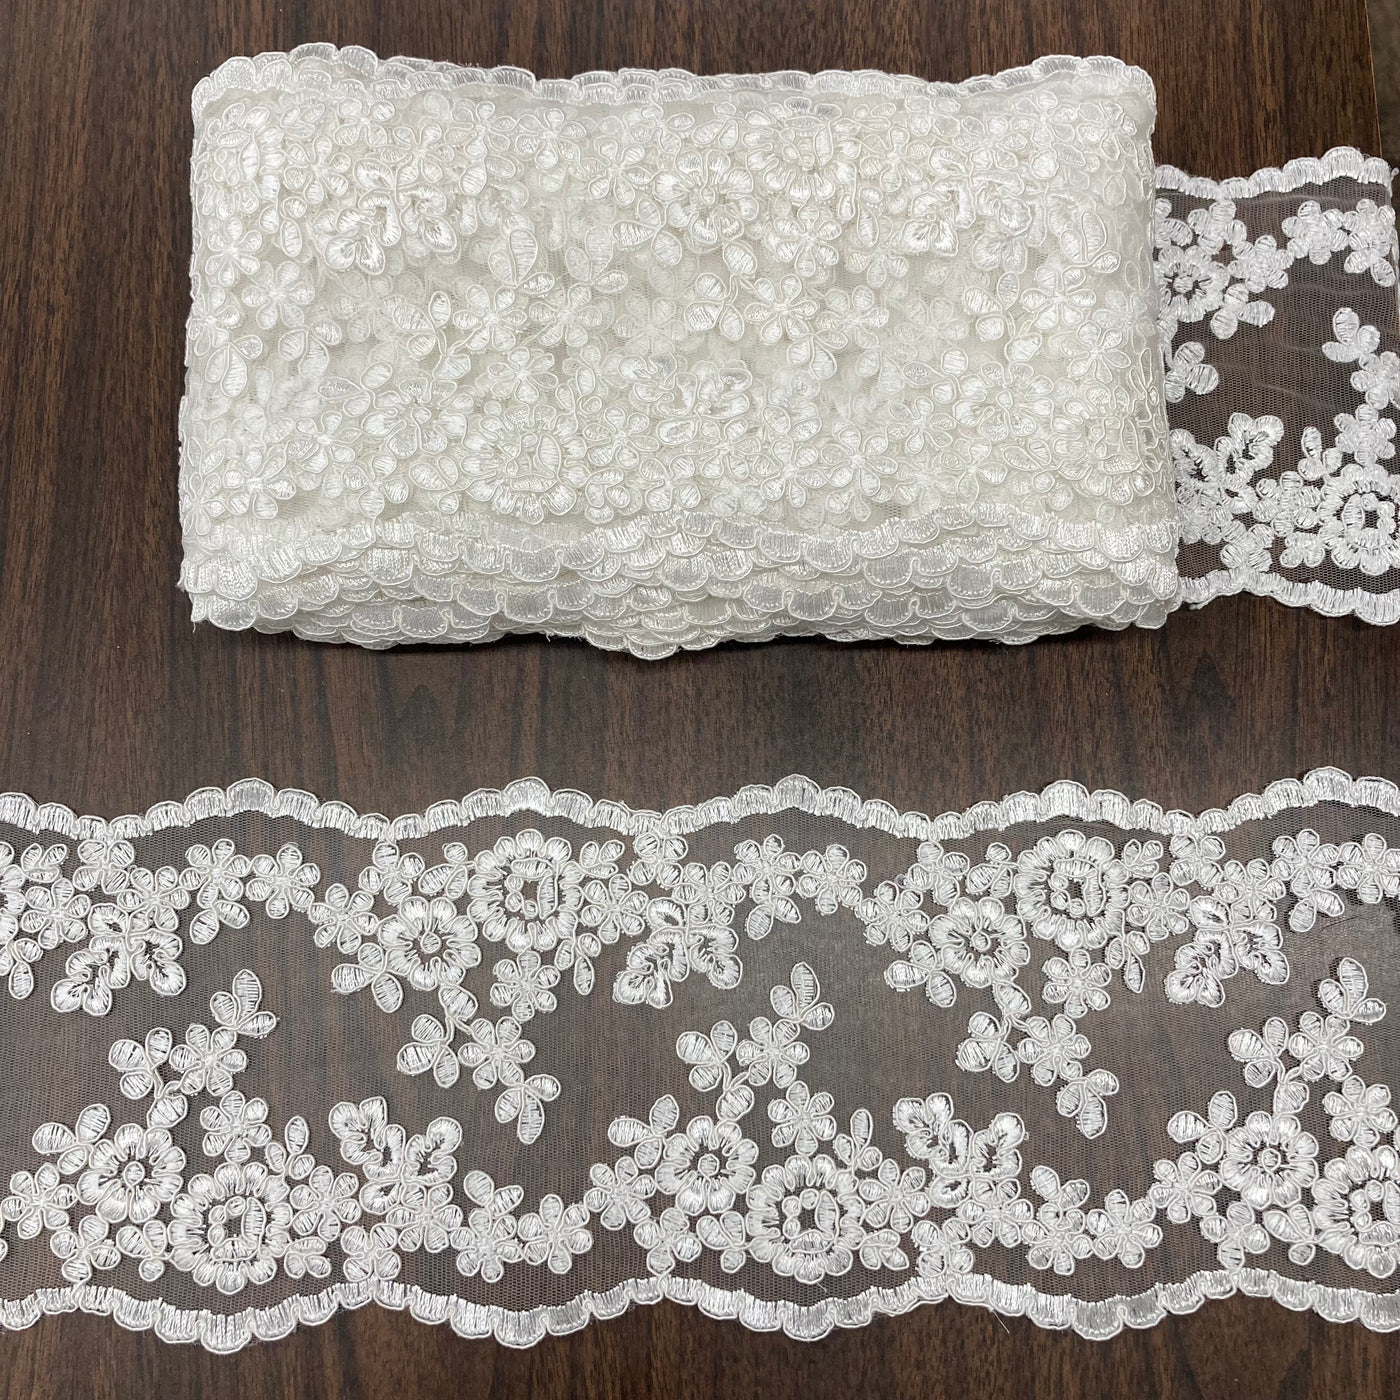 Corded & Embroidered Double Sided Trimming on Ivory  Mesh Net Lace. Lace Usa